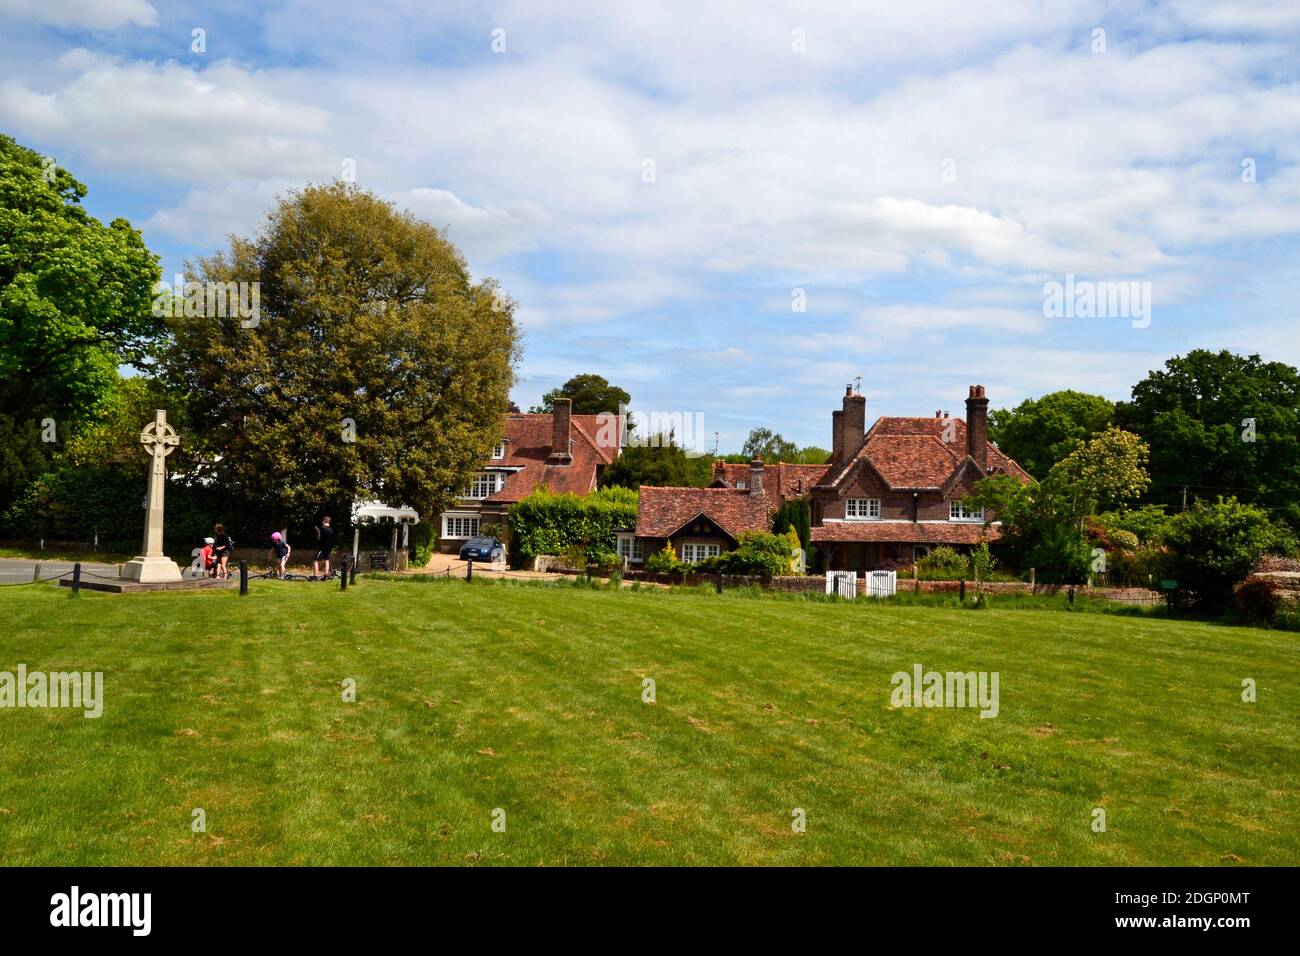 View of cottages and a celtic cross war memorial, on the village green at Lee Common, Buckinghamshire, UK Stock Photo